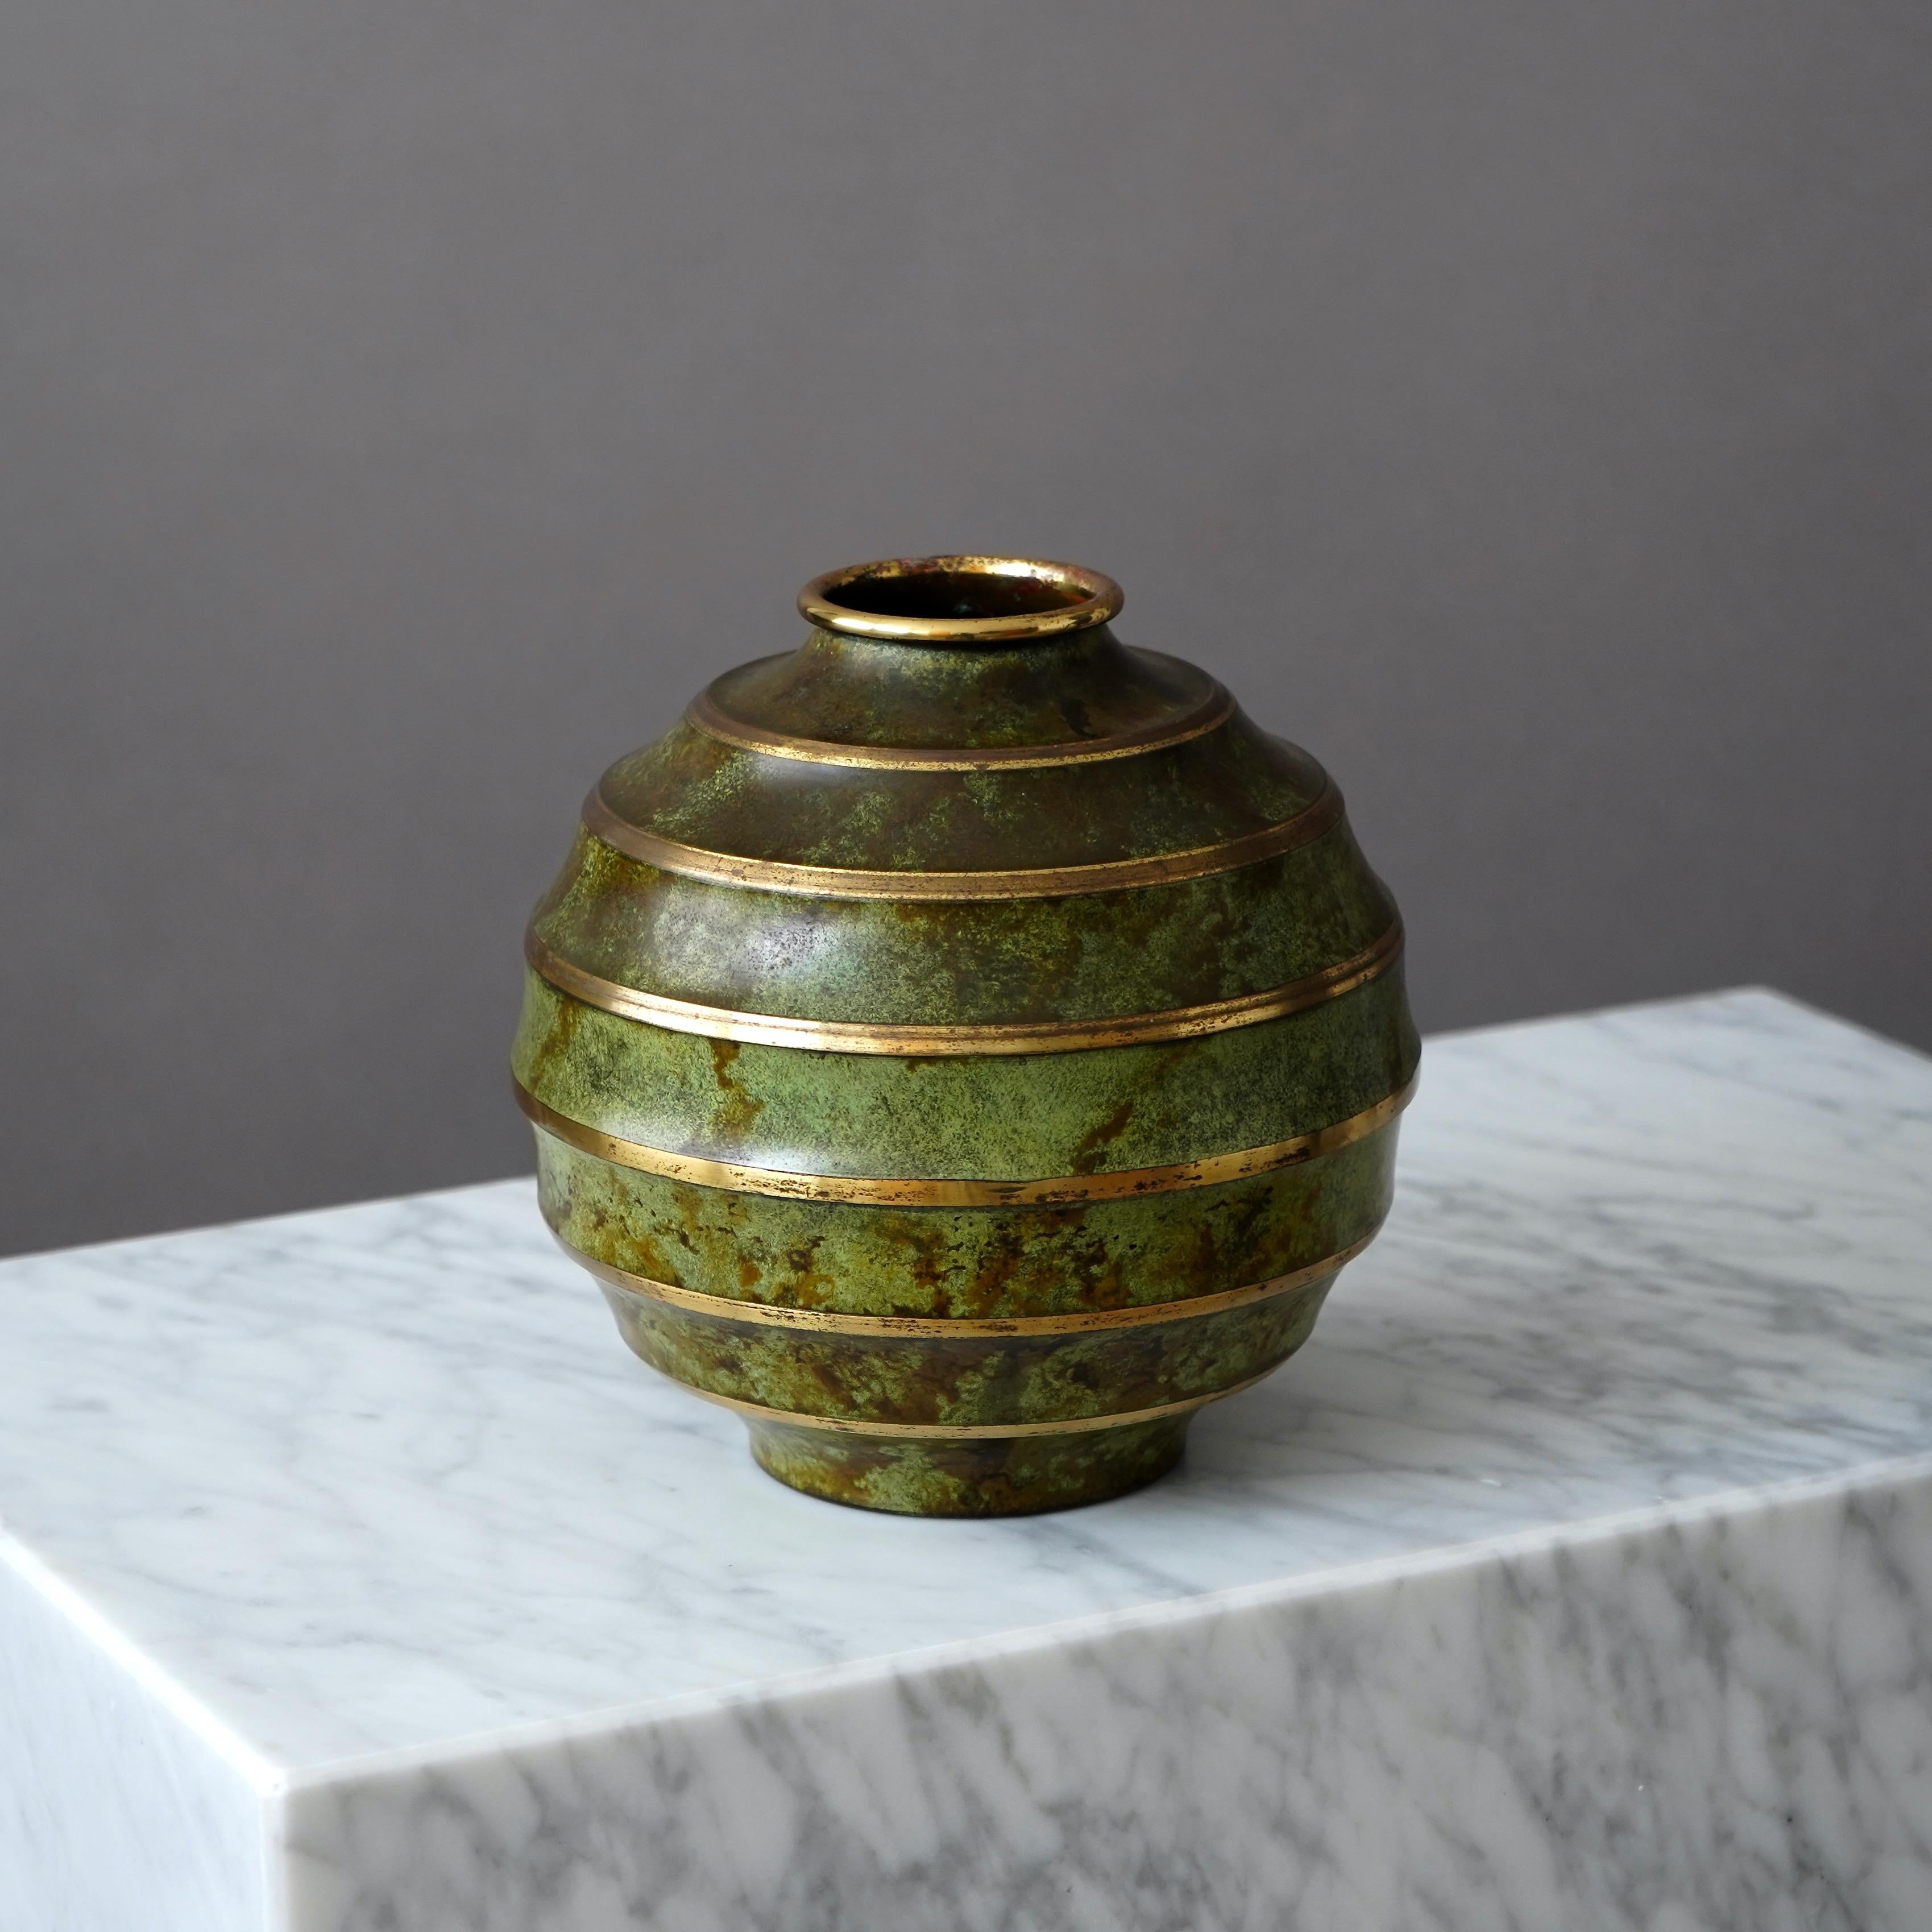 A beautiful art deco bronze vase with amazing patina. 
Made by SVM, Svenska Metallverken AB, Sweden, 1930s.  

Great condition, with only a few light scratches.
Stamped 'HANDARBETE' and makers mark 'SVM'.